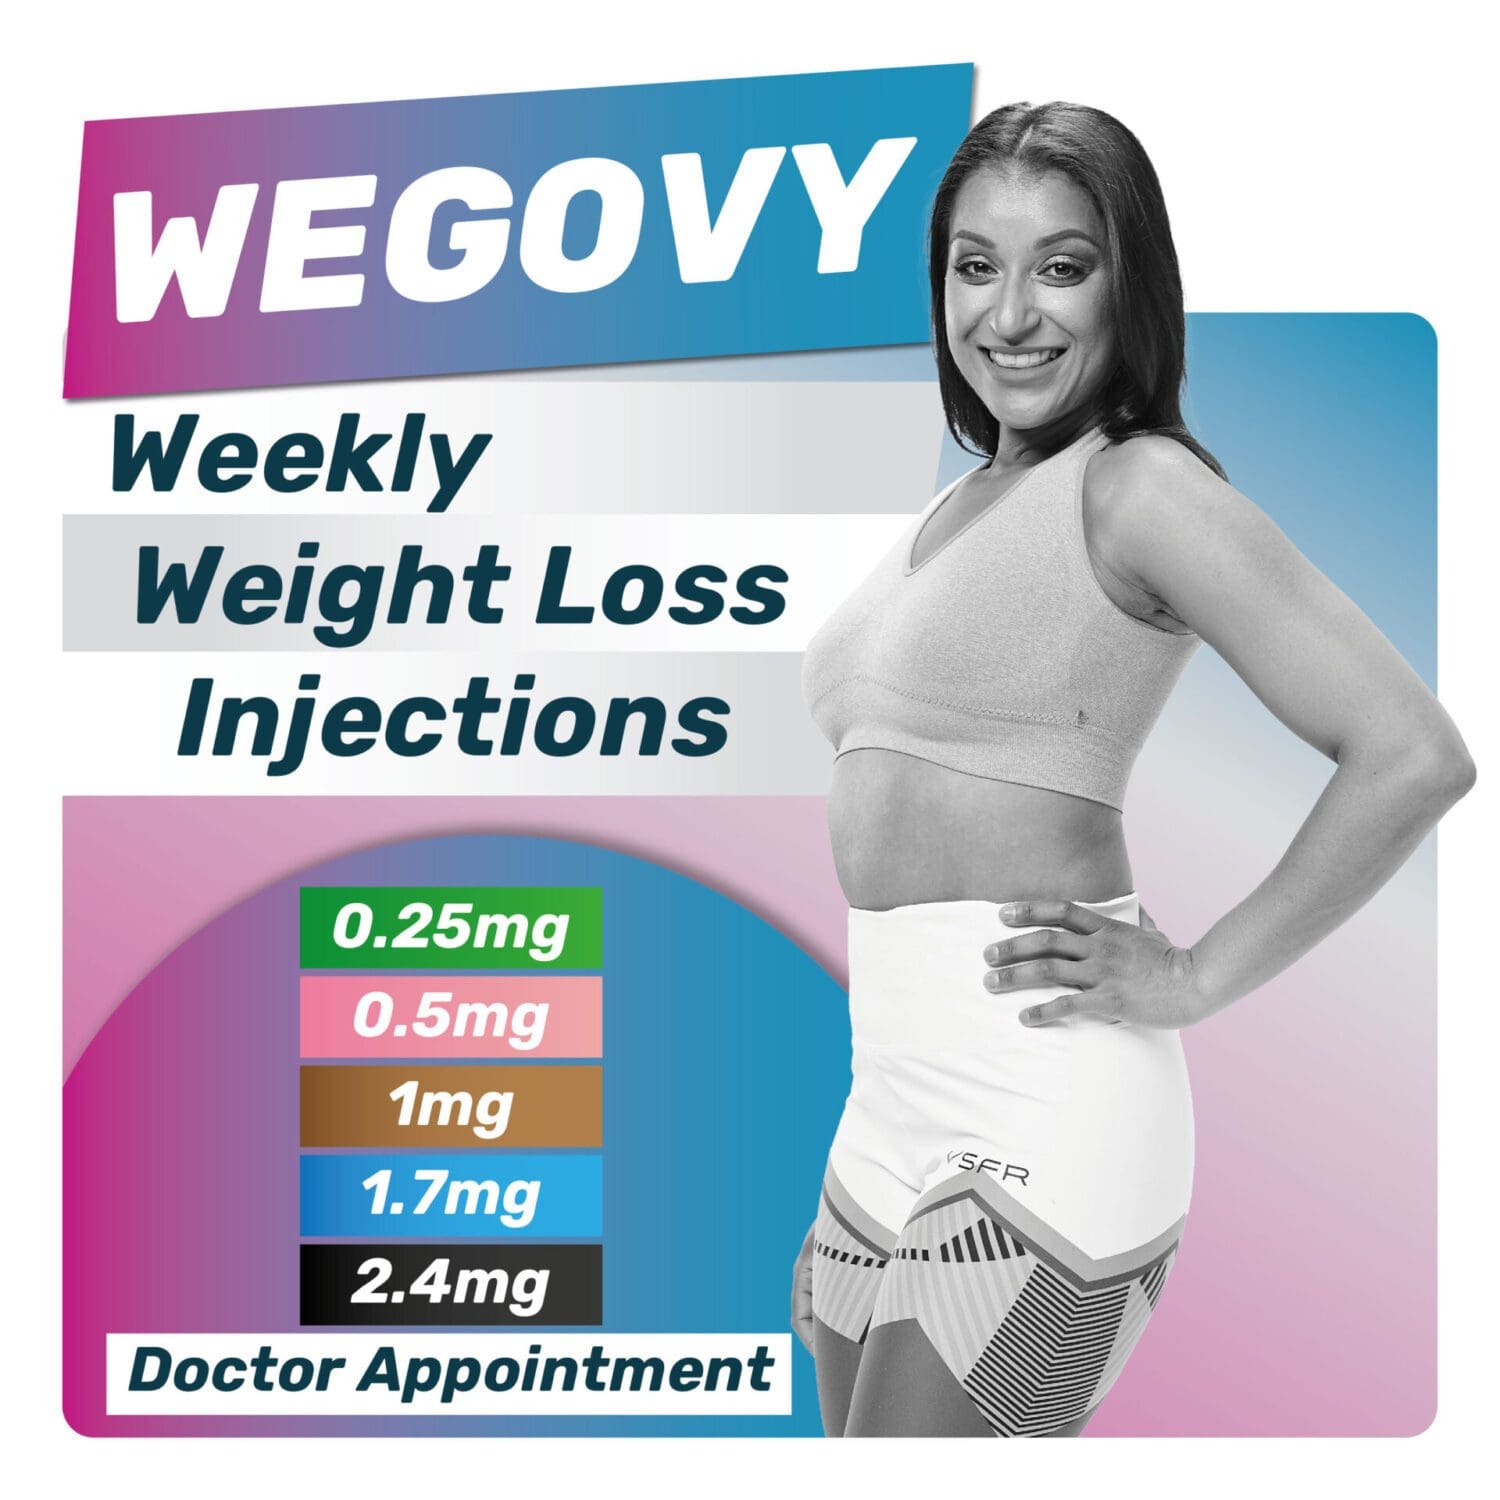 Everything you need to know about Wegovy weight loss injections